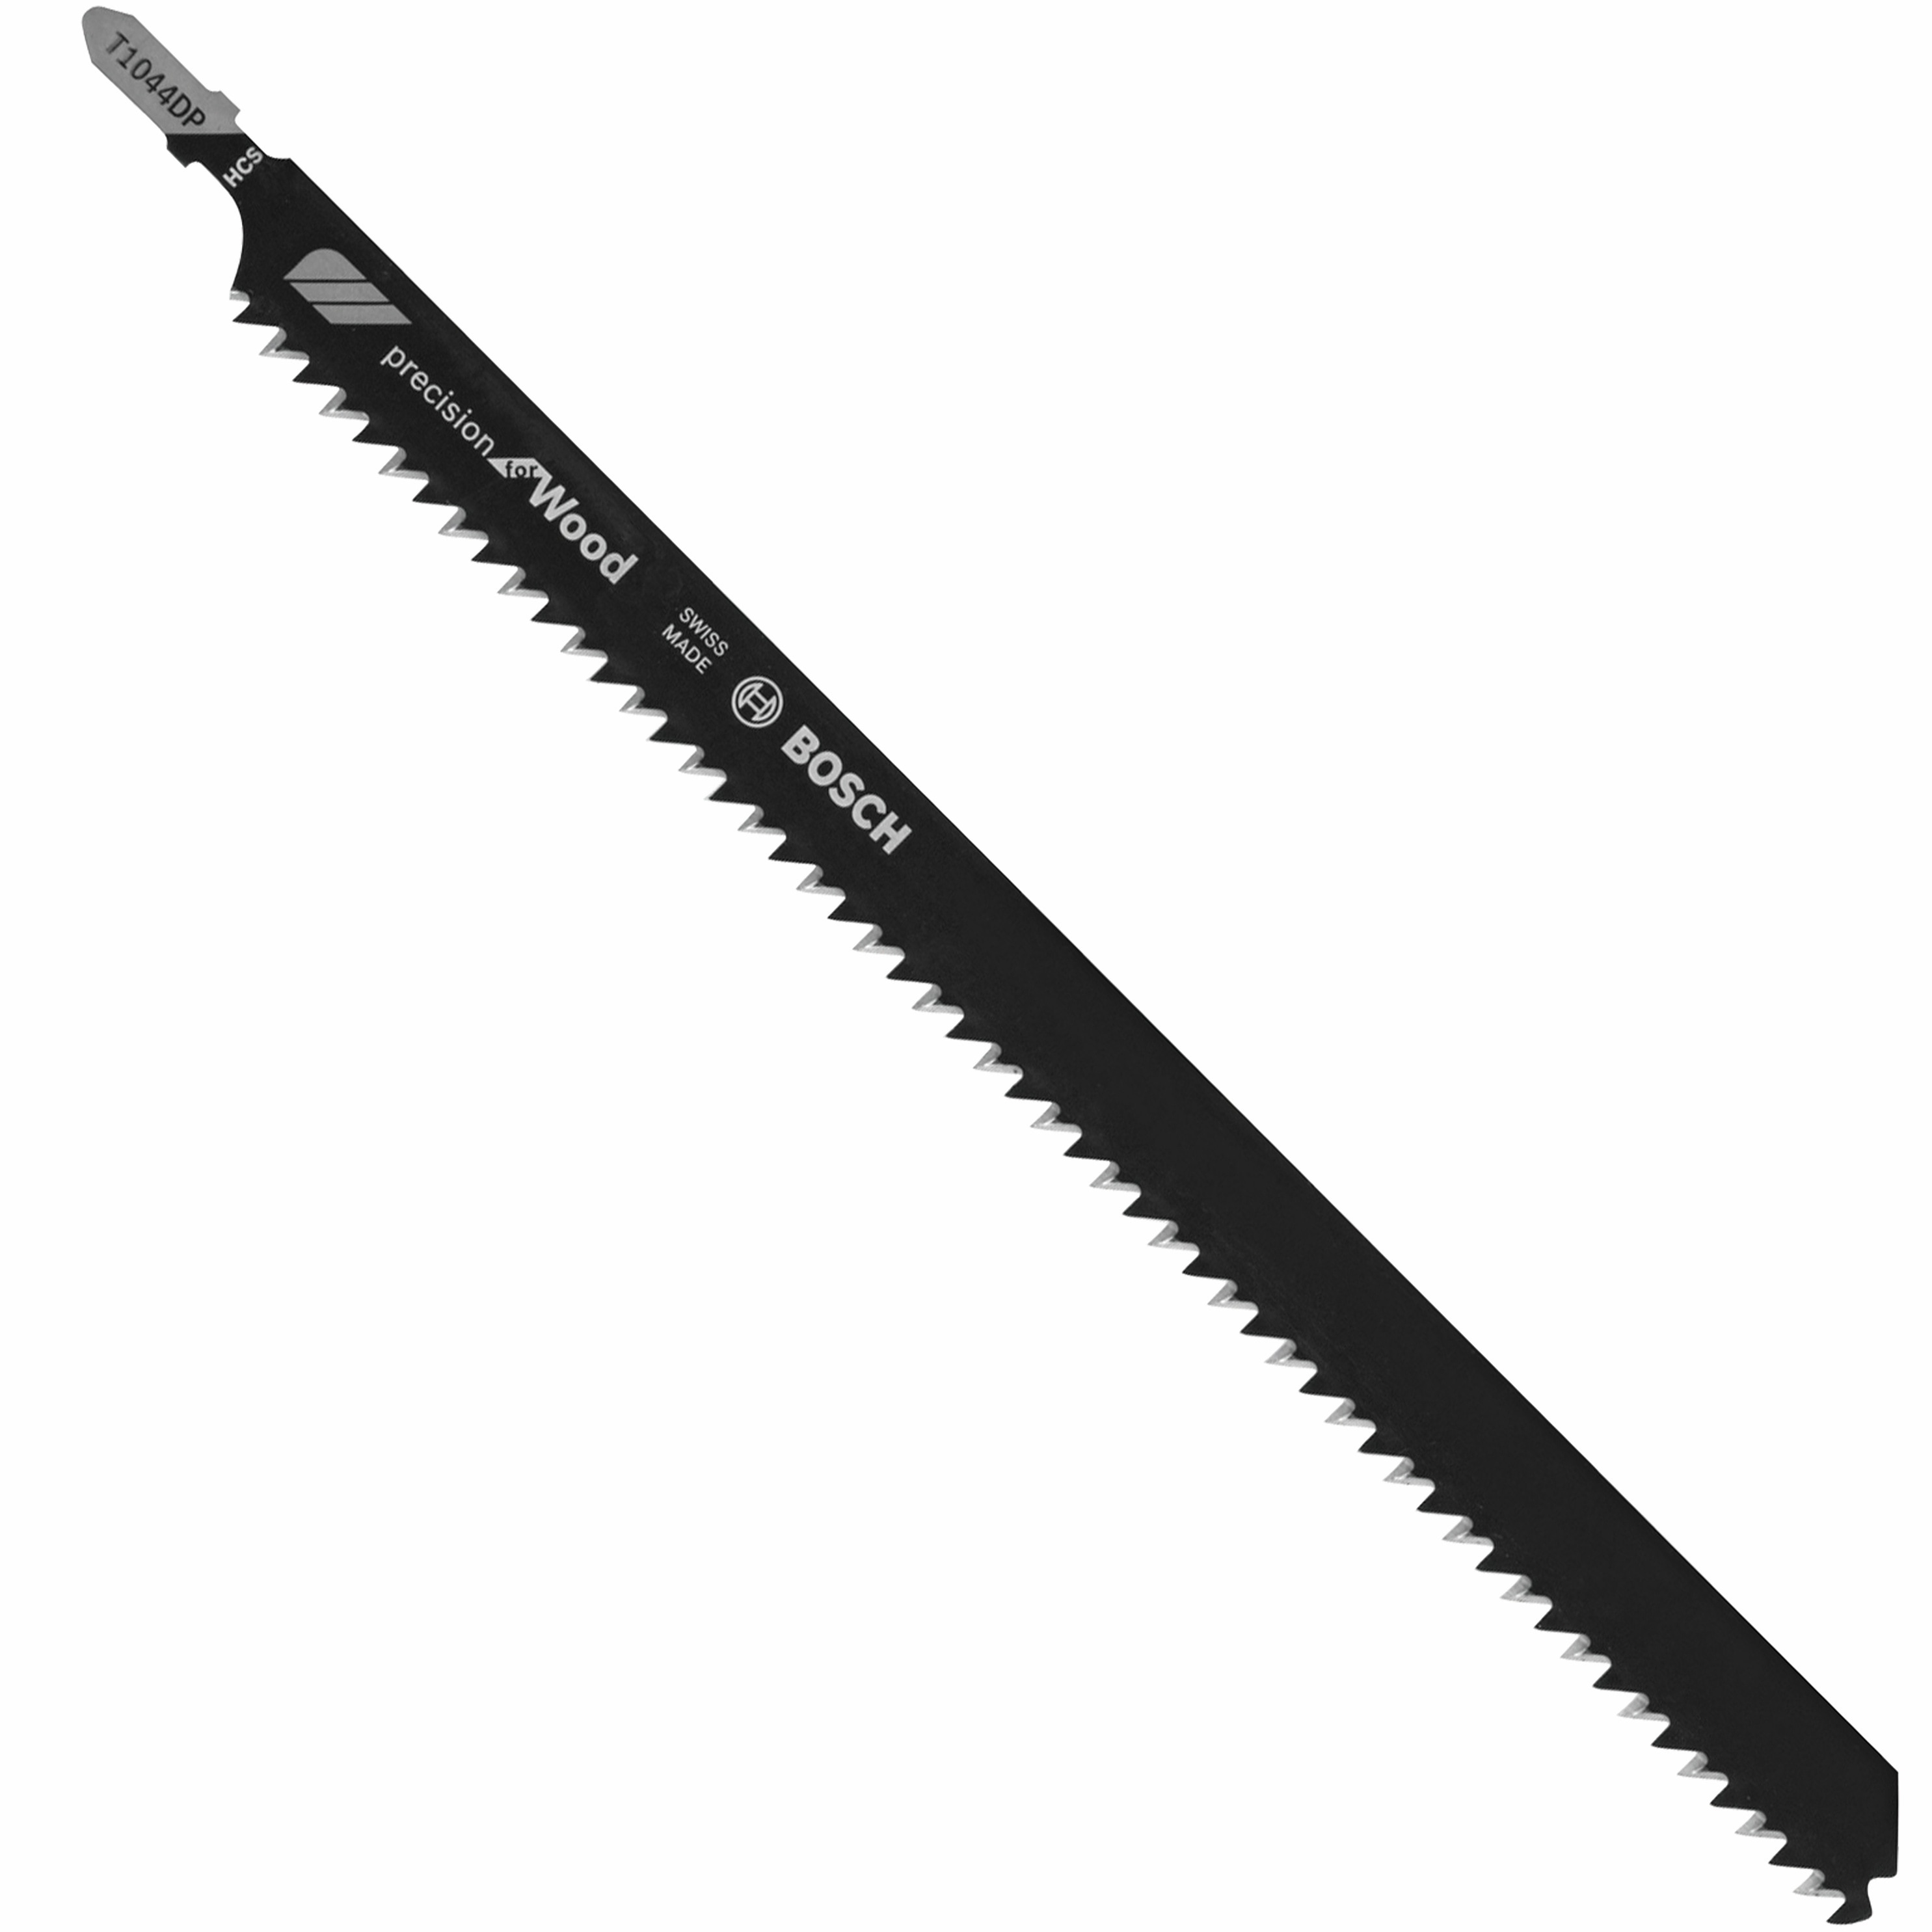 20 Inch Hand Saw Blade 500mm Long, Handle 115mm Long, Weight 418g